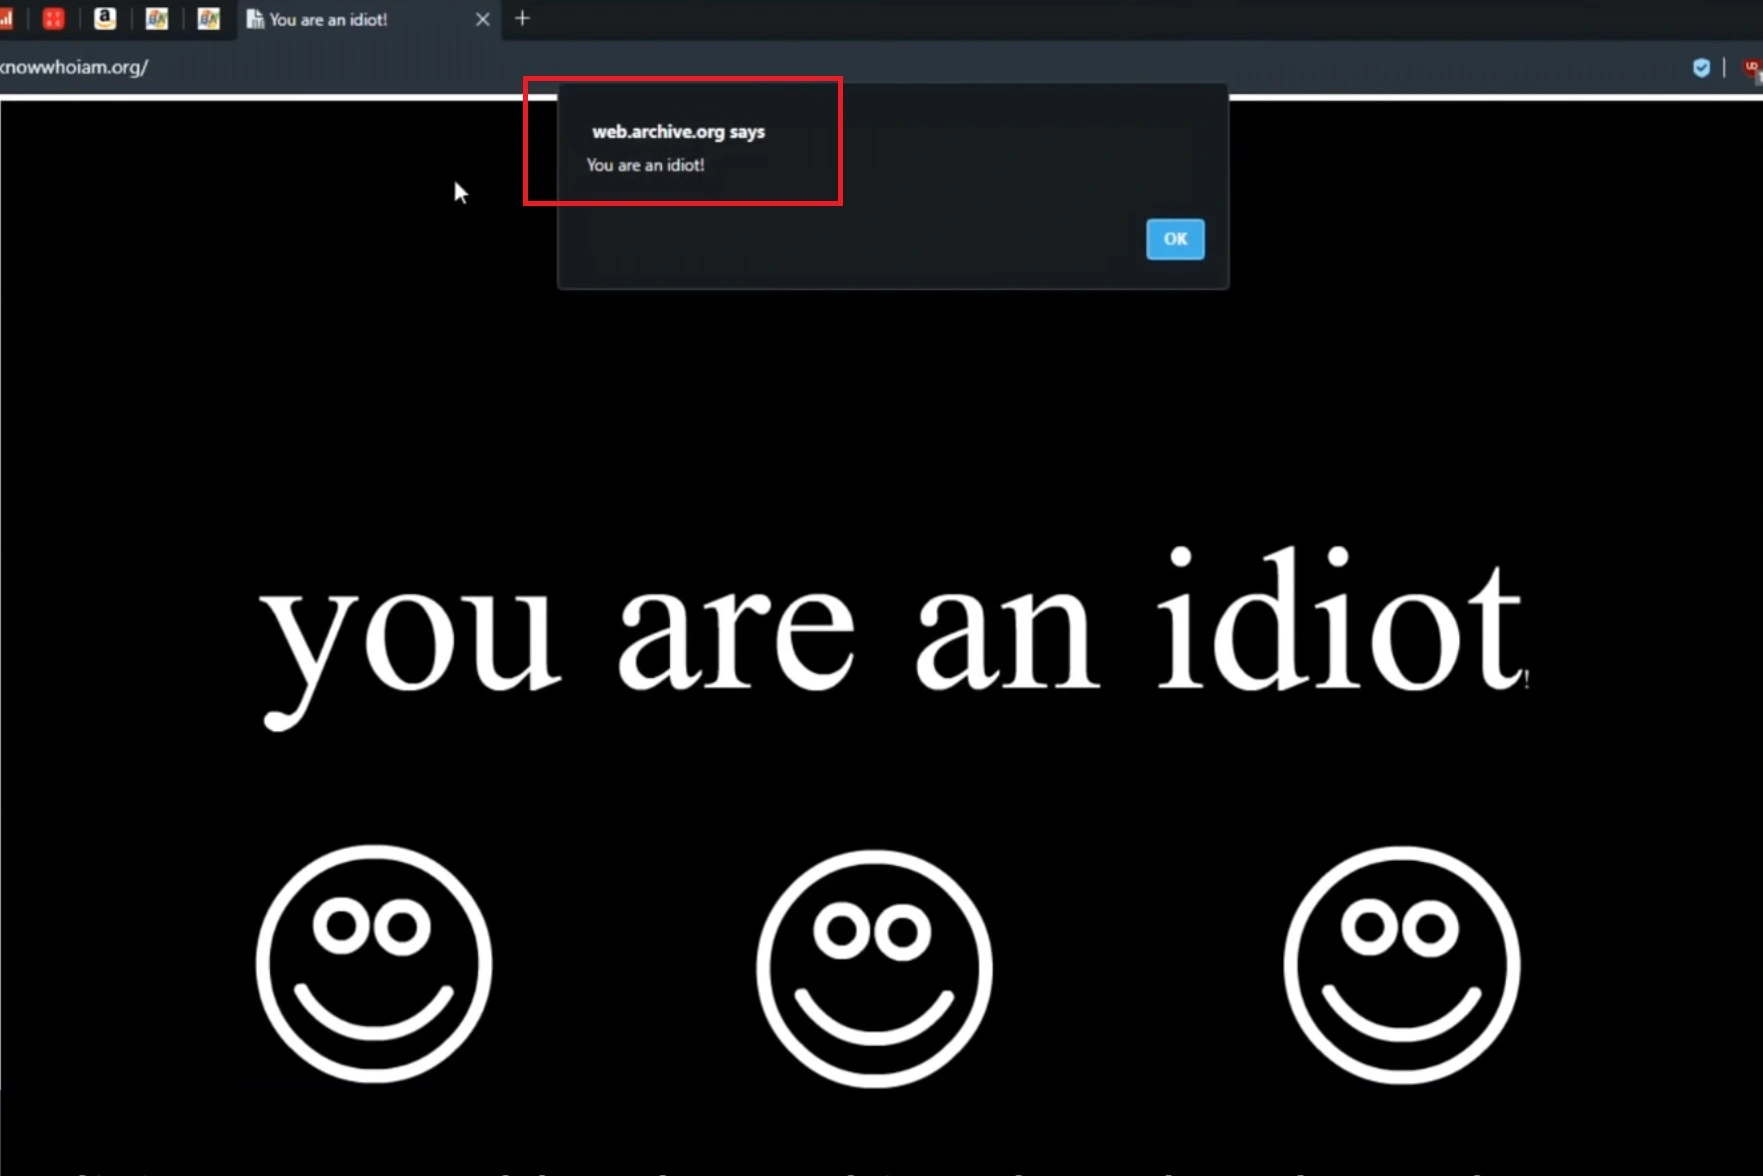 GitHub - HackerSinhos/You-Are-An-Idiot: You Are An Idiot is back in windows!